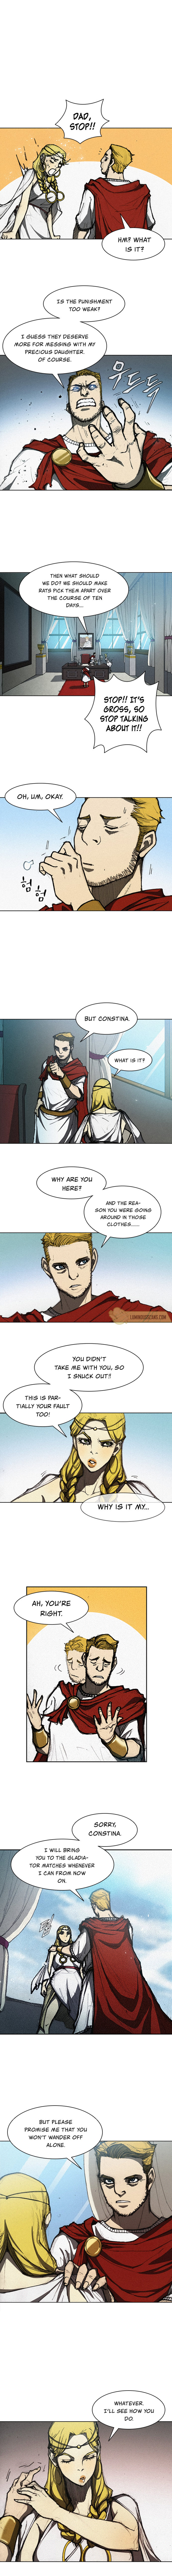 Long Way of the Warrior - Chapter 11 Page 8